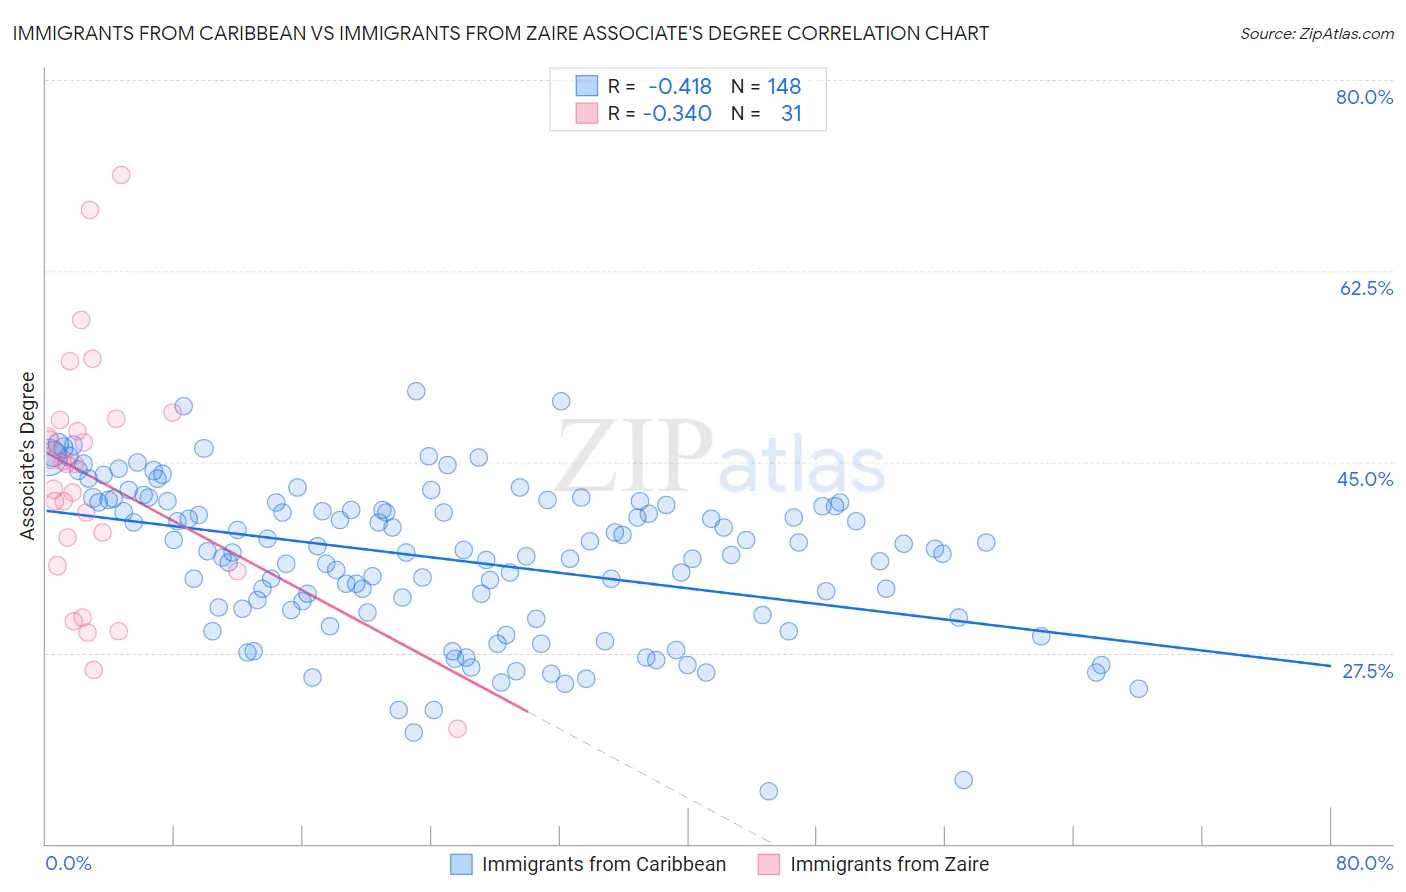 Immigrants from Caribbean vs Immigrants from Zaire Associate's Degree